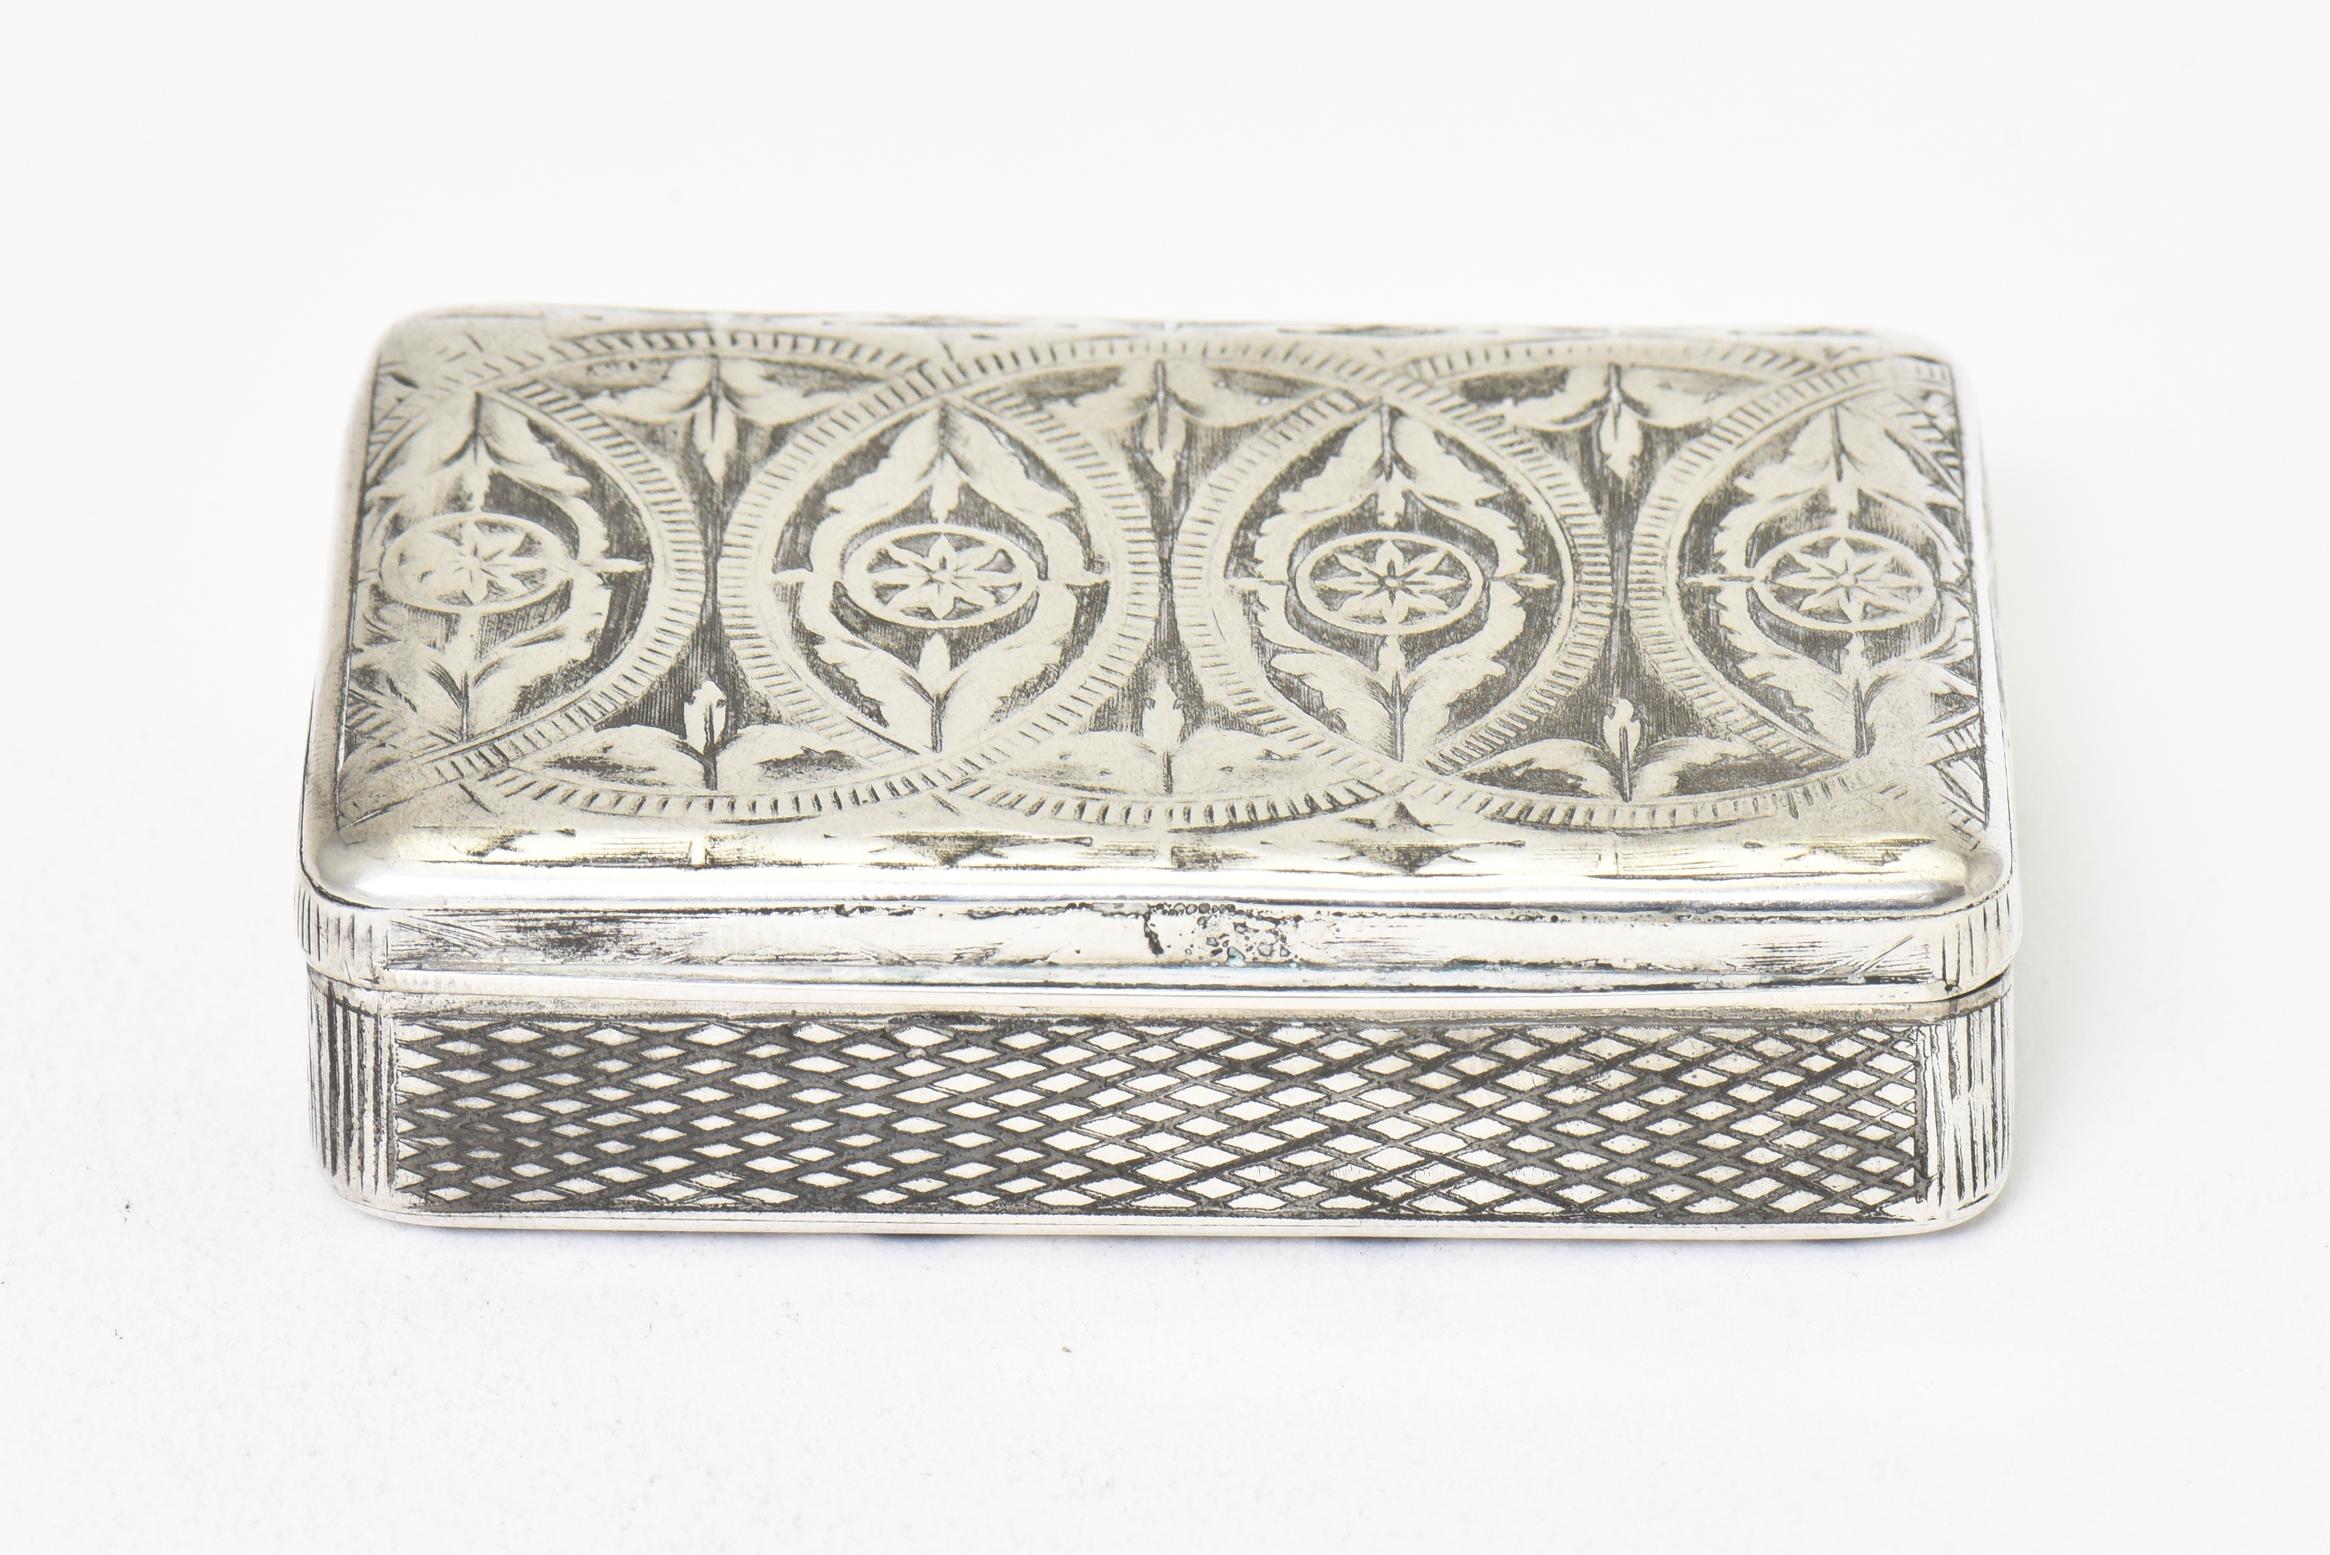 Antique Moscow, Imperial Russian niello snuff, pill, tobacco or trinket box featuring a beautiful floral design on top and bottom and diamond design sides. The rectangular box hinges open to reveal a gilt inside. Inside are Russian hallmarks: an 84